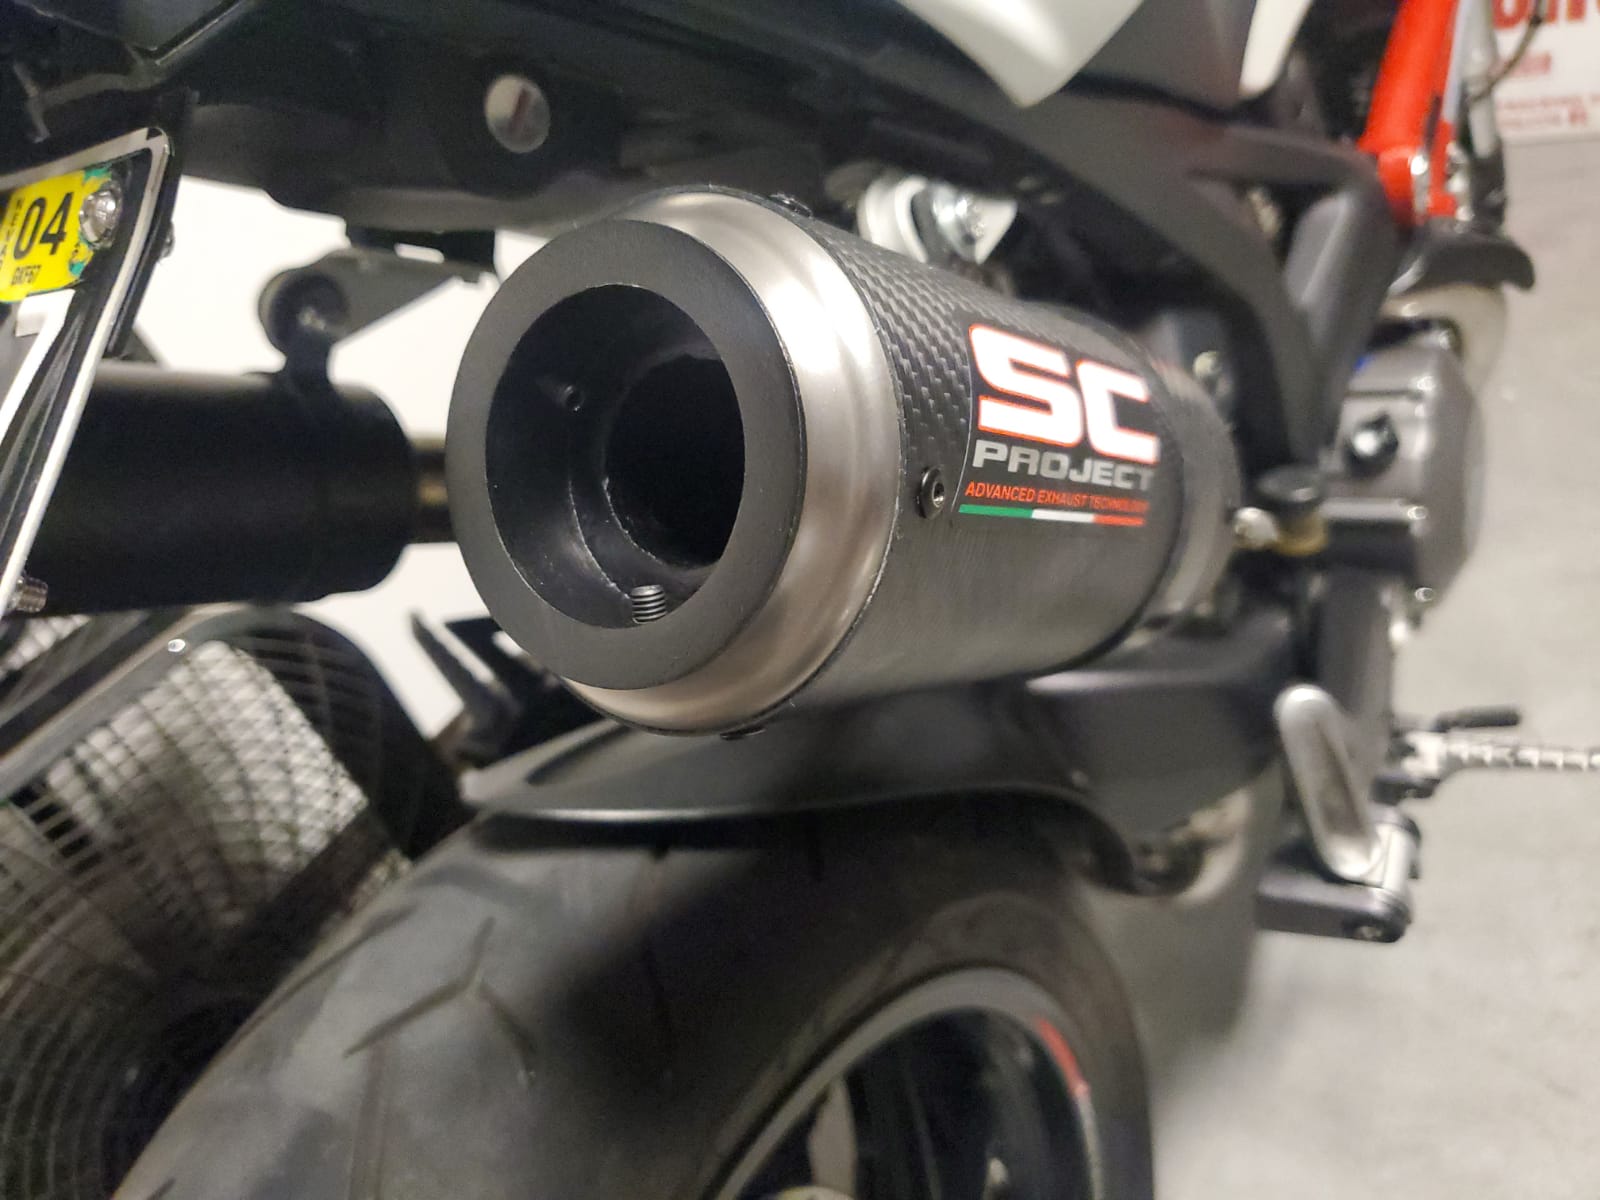 Who Said DB KILLERS Can't Be Made For CRT SC Project? – Barrel Exhaust